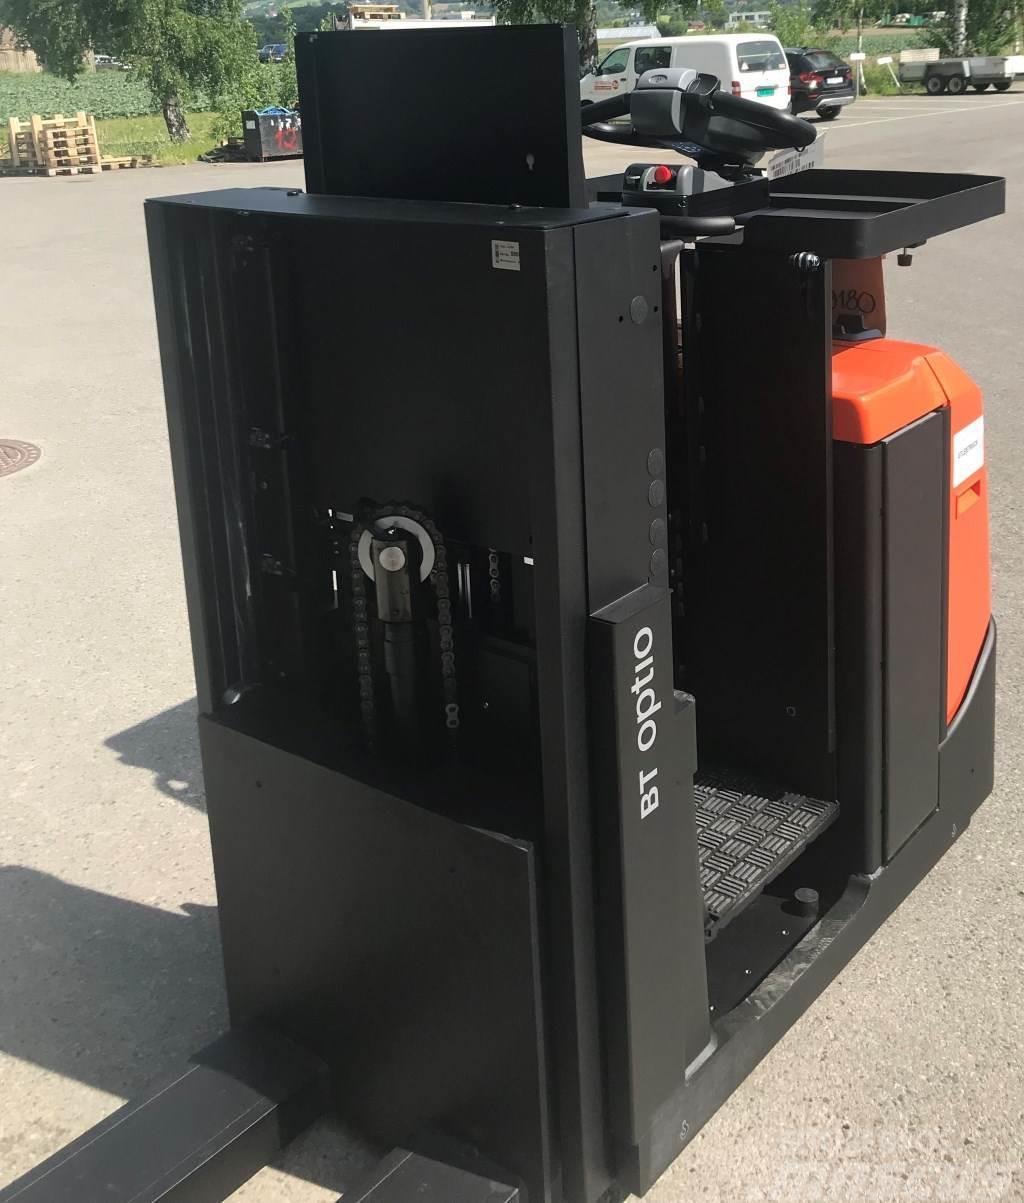 Toyota OSE120P Low lift order picker